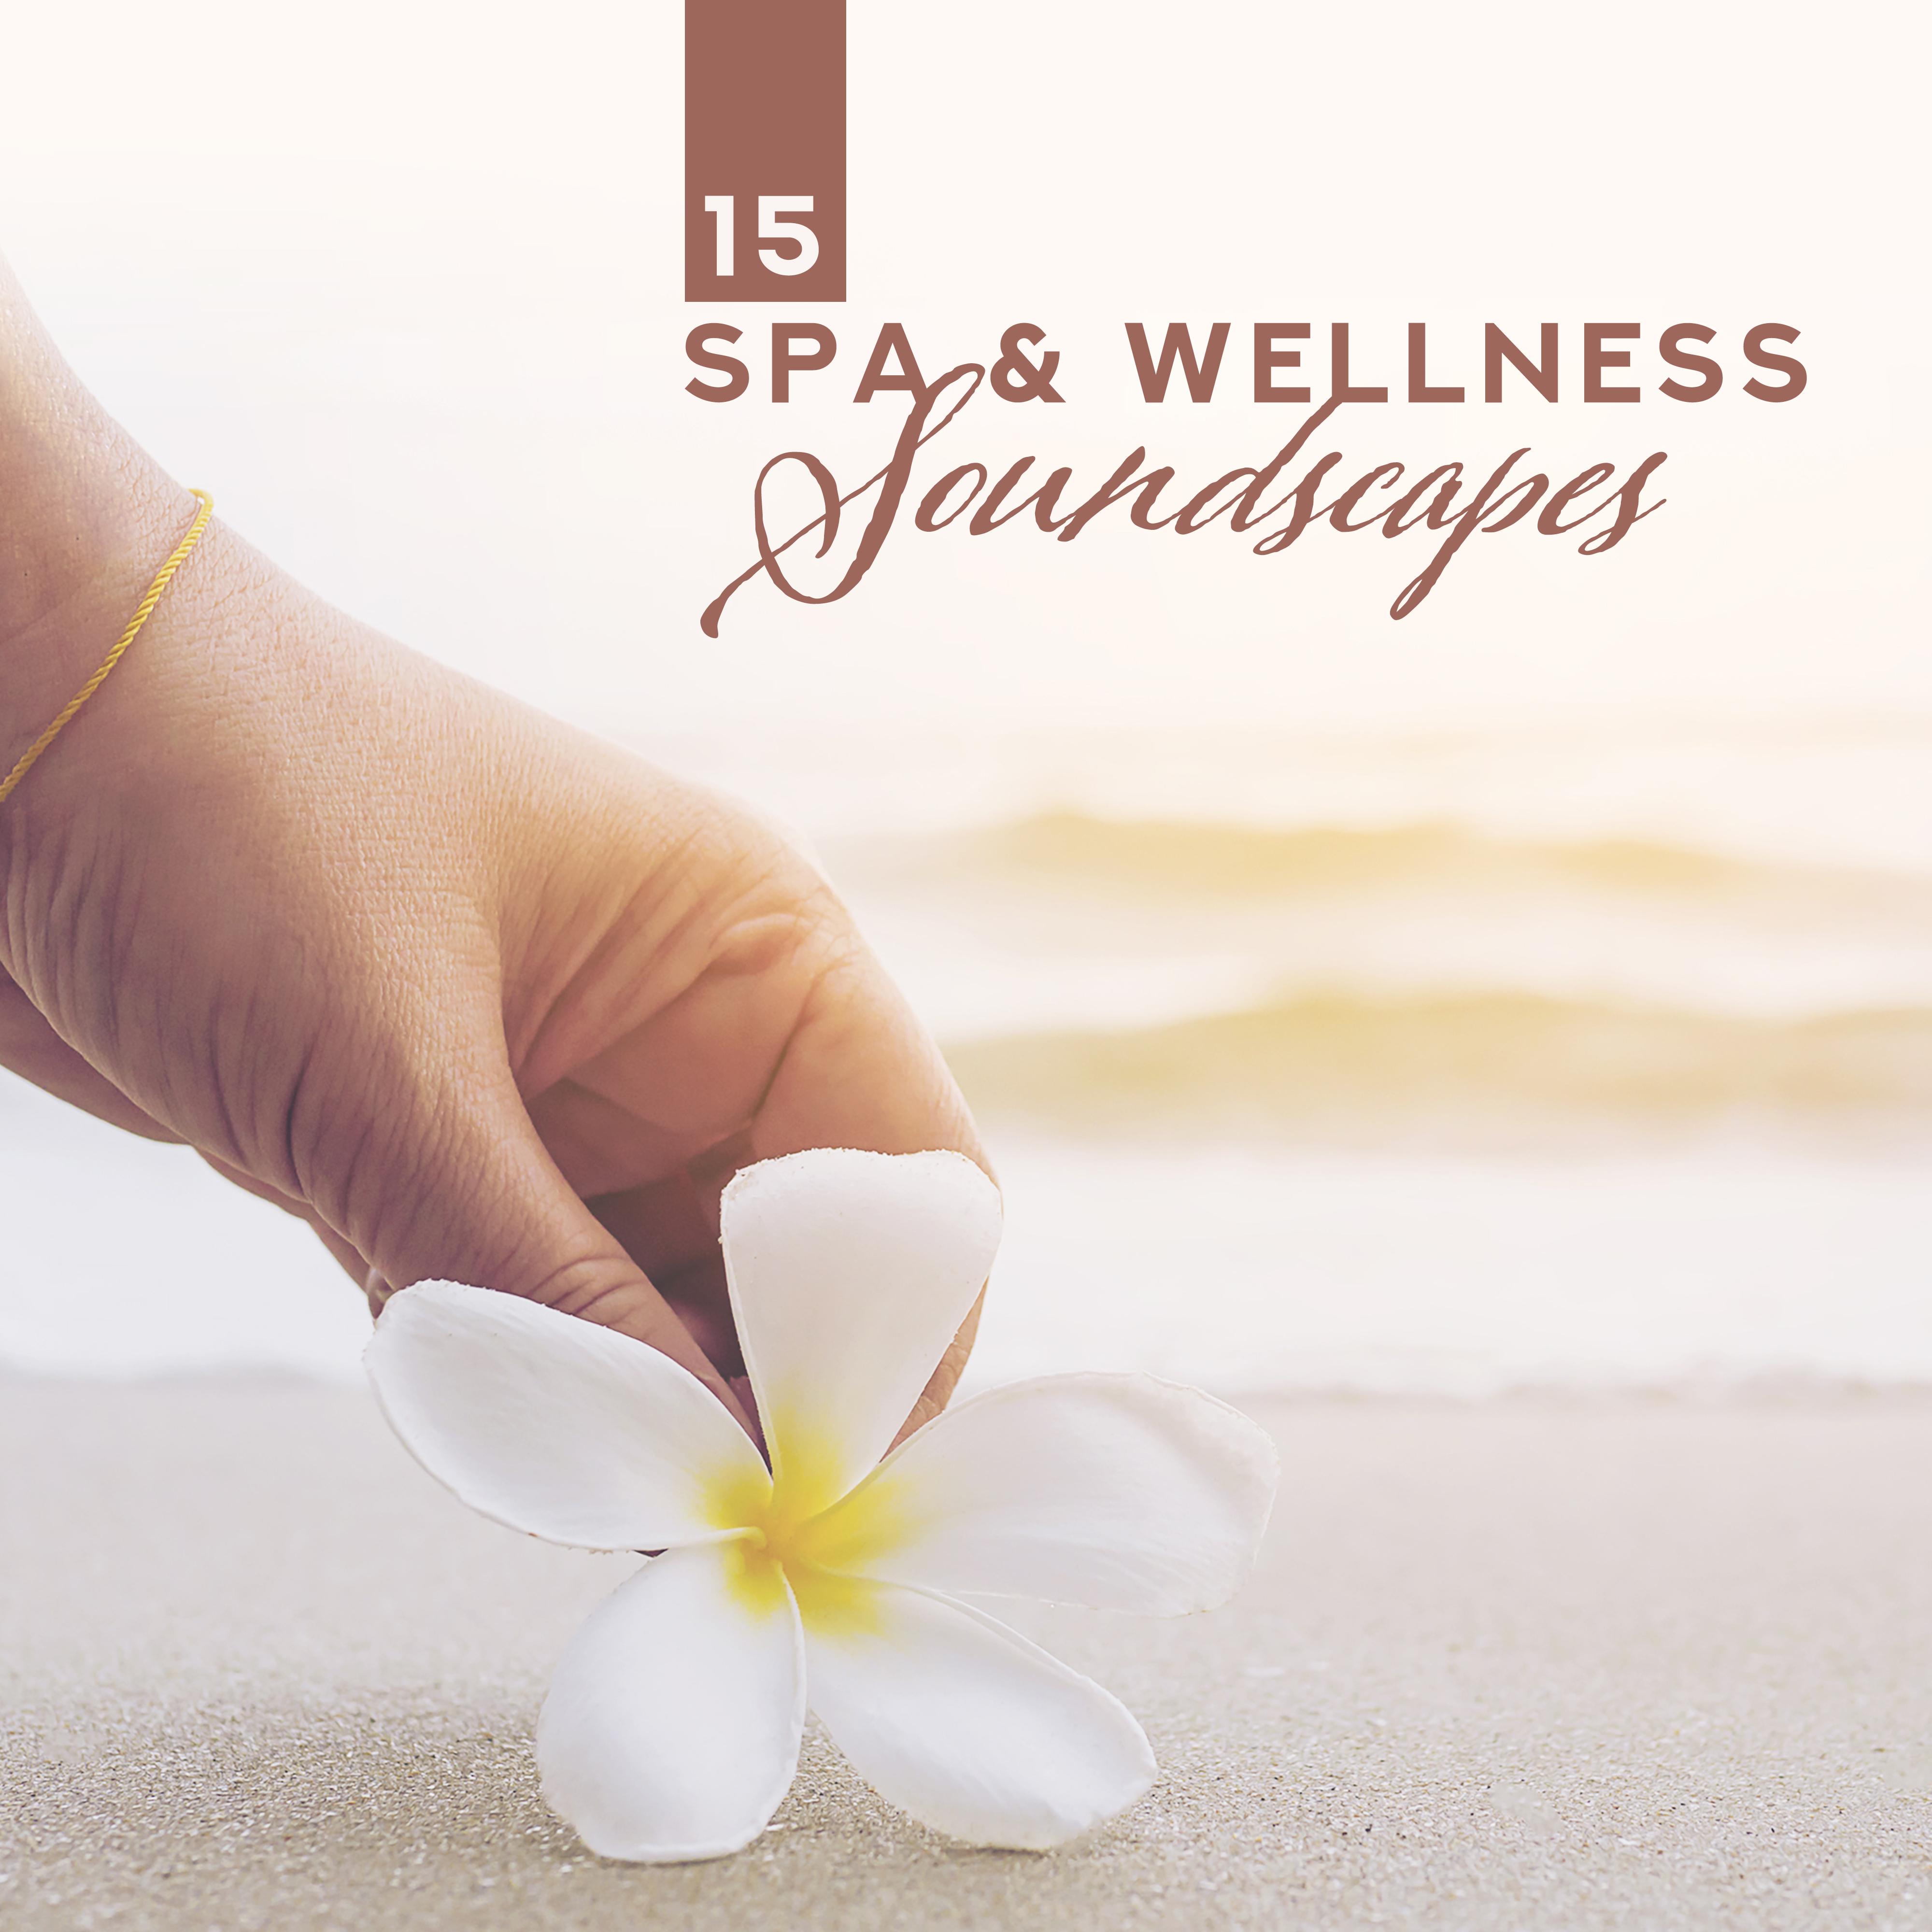 15 Spa & Wellness Soundscapes: 2019 New Age Nature & Ambient Music Created for Spa Salon, Wellness, Massage Therapy, Deep Body & Mind Relaxation